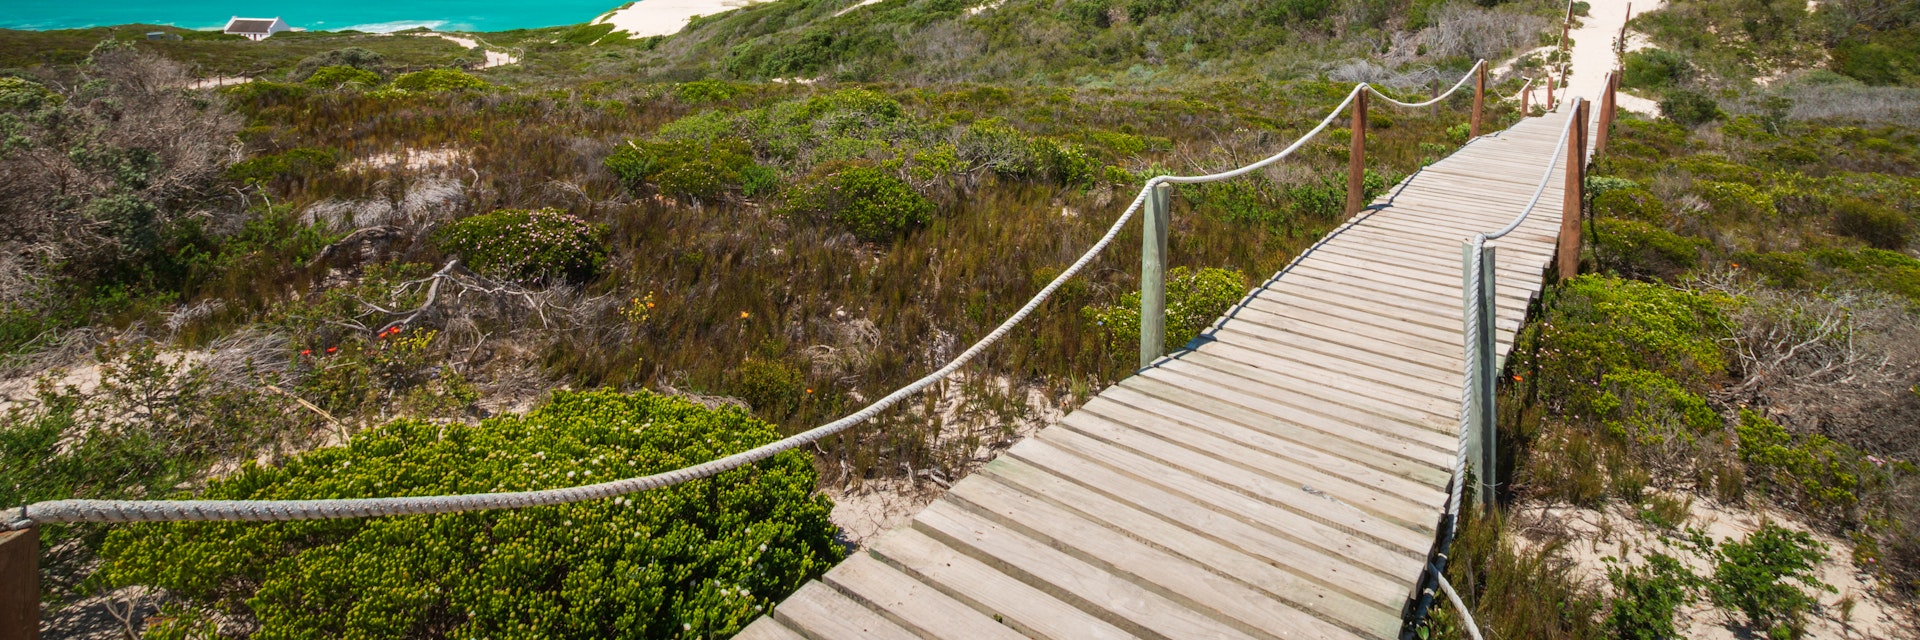 Wooden footpath leading to the beach at De Hoop Nature Reserve in South Africa.